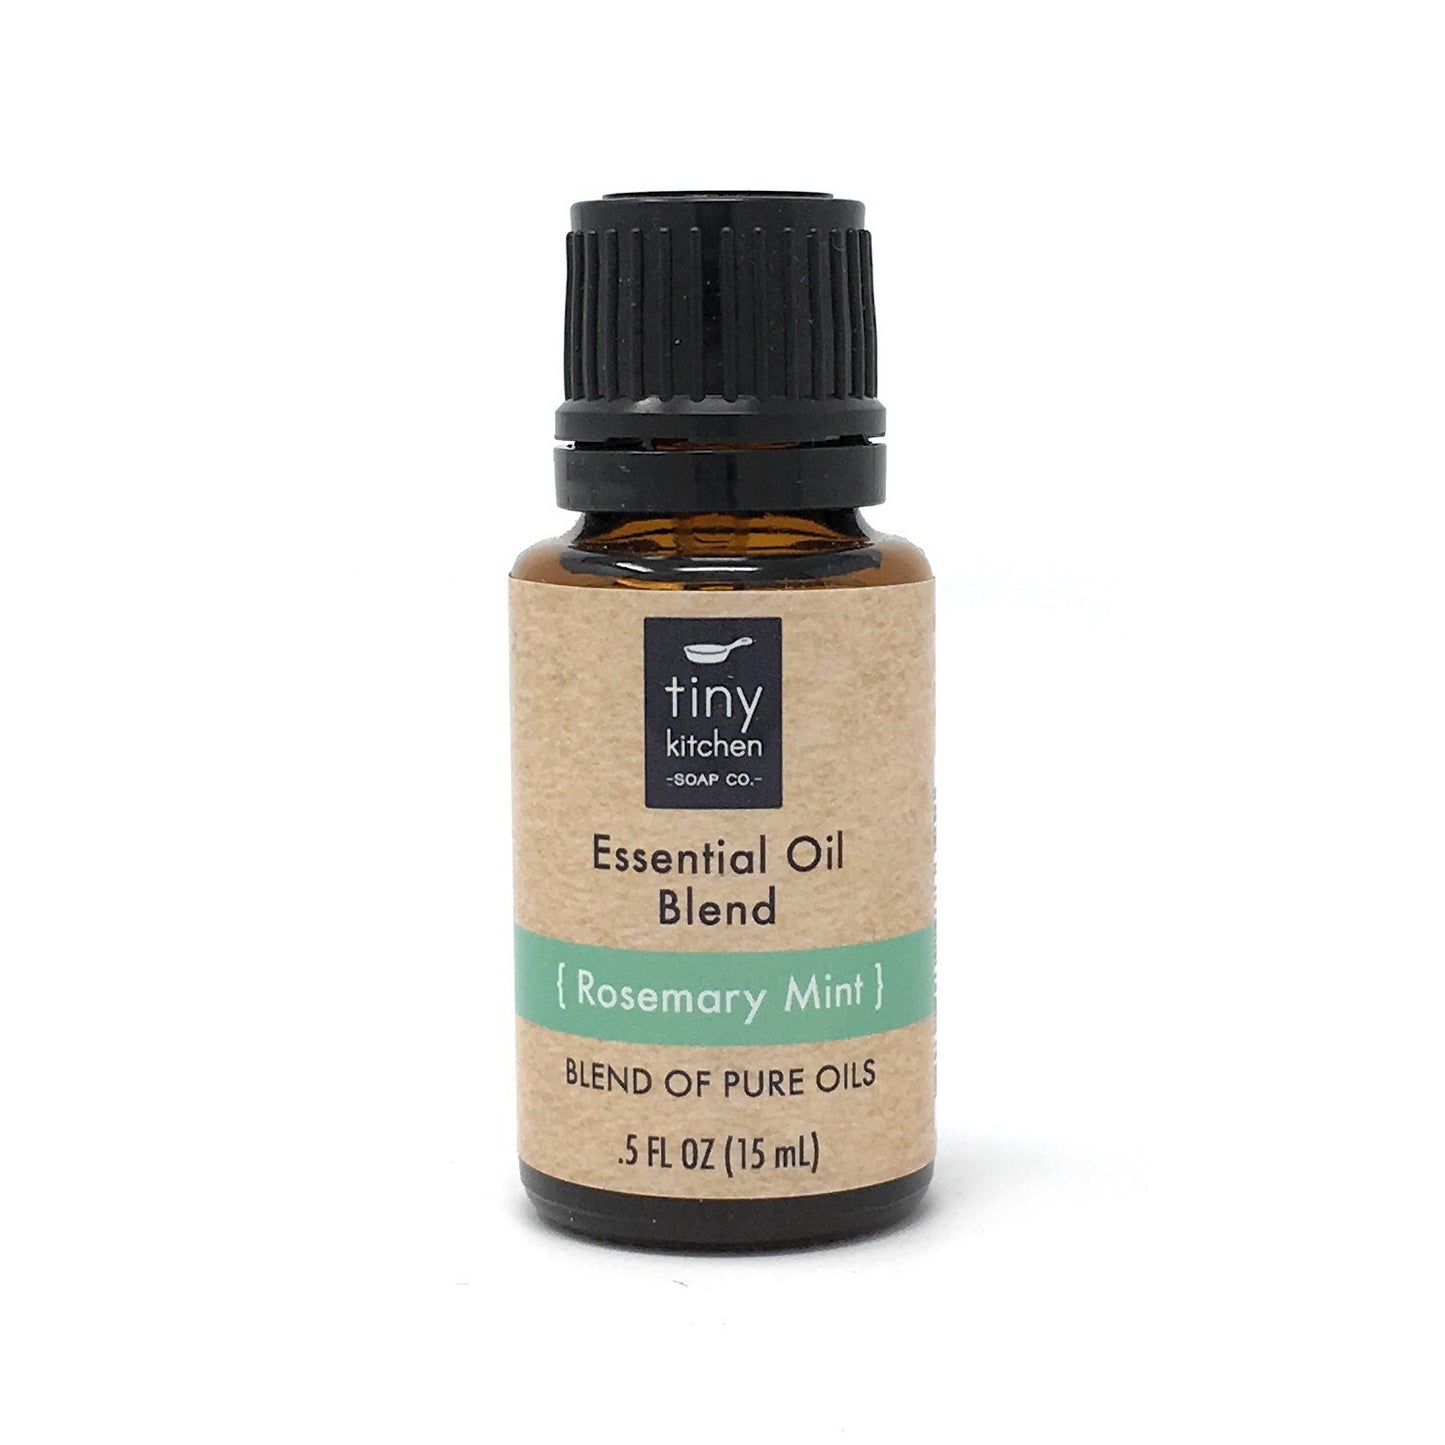 Rosemary Mint Essential Oil Blend